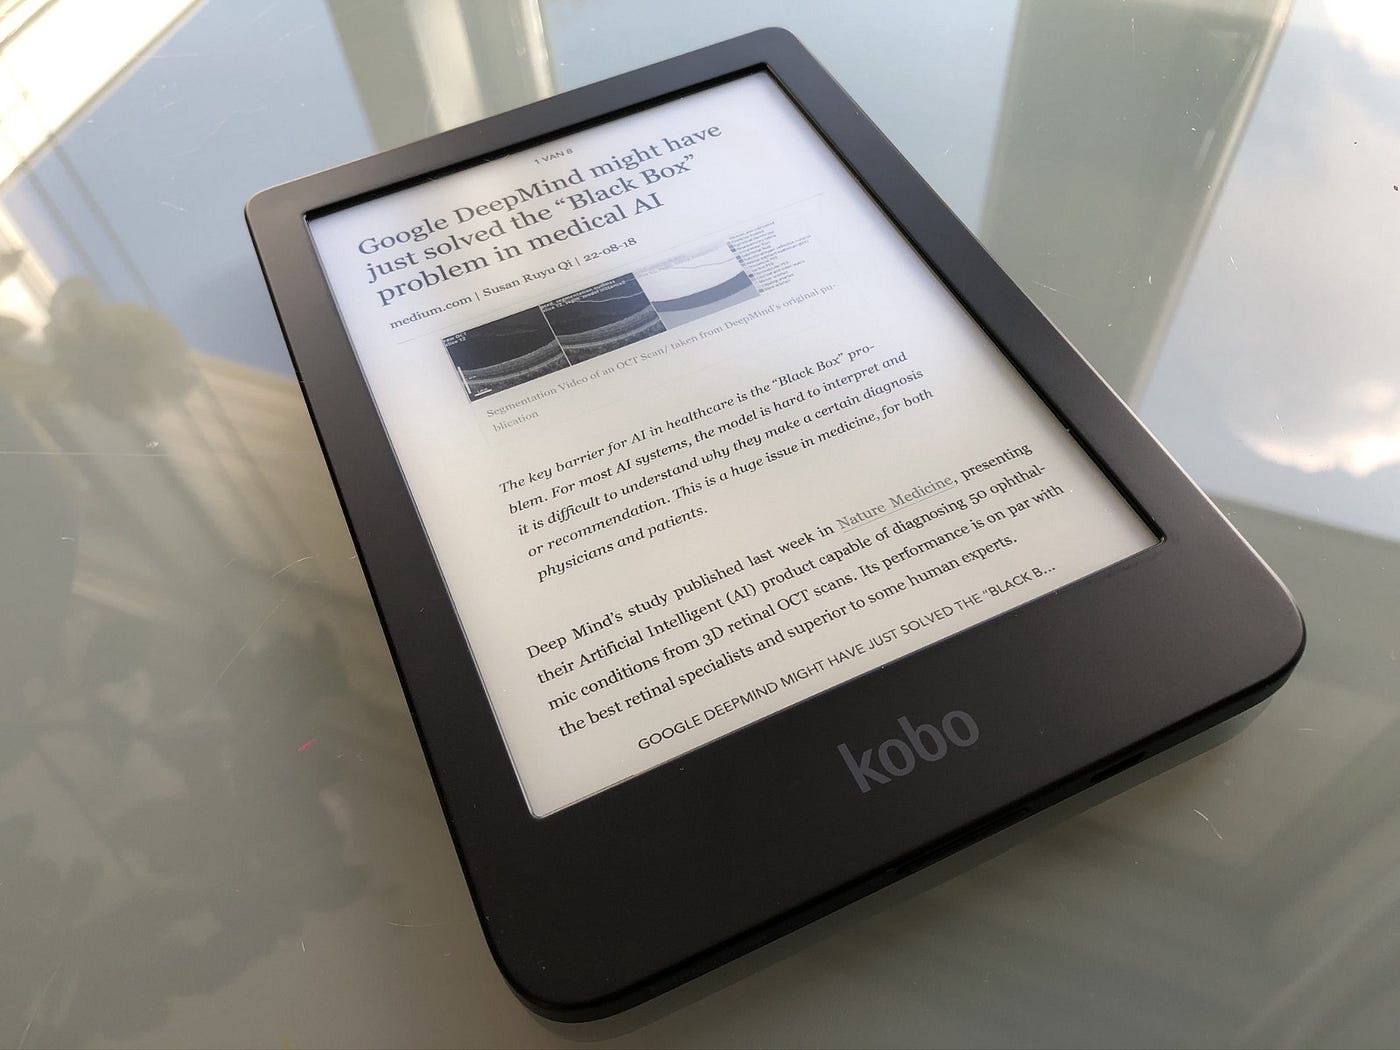 Read Medium articles on Kobo. I wanted to do two things. Publish a… | by  Robert Hoeijmakers | Medium